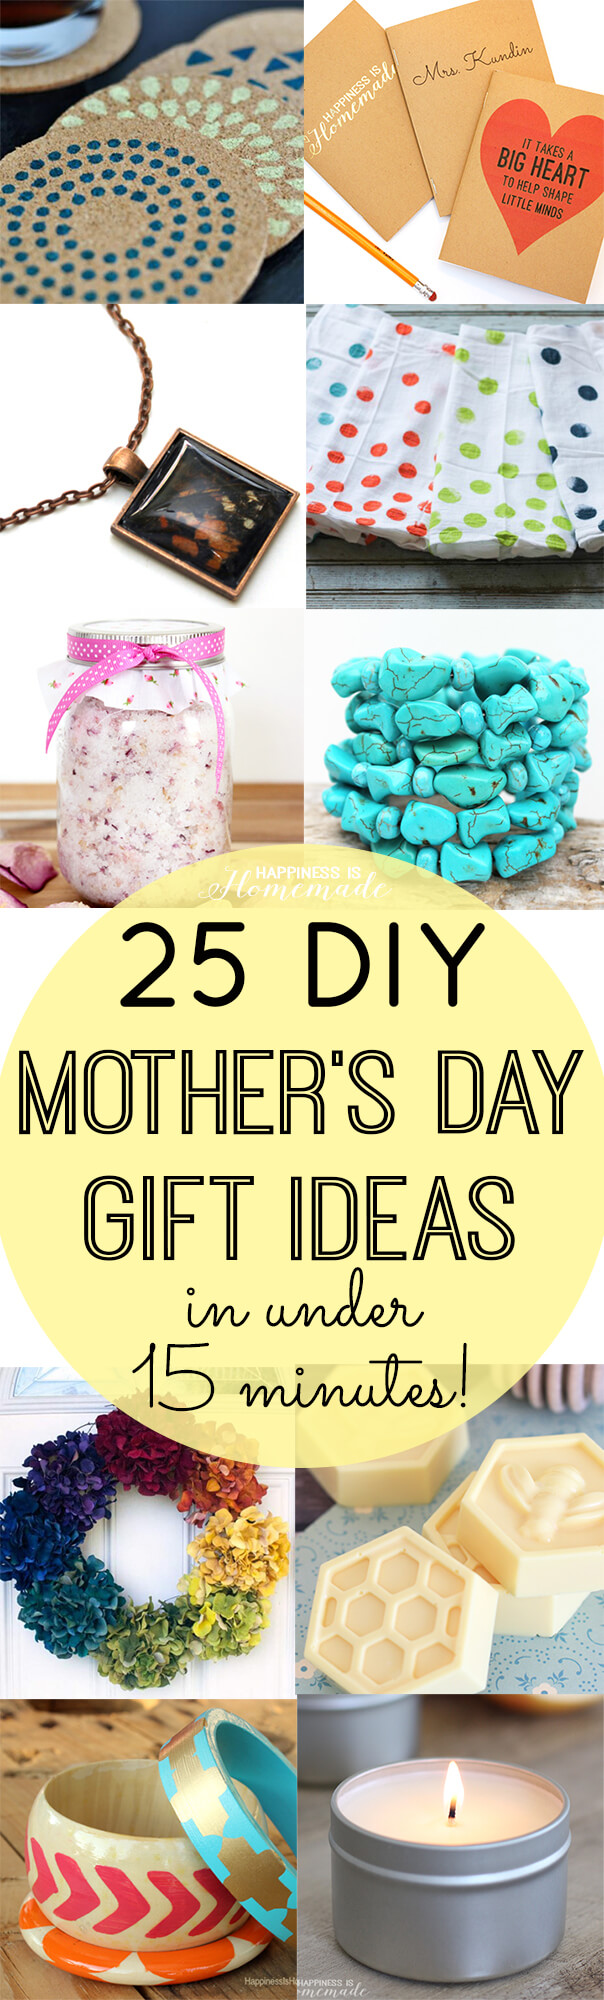 25 Last-Minute DIY Gifts That You Can Whip Up in No Time | Quick diy  christmas gifts, Last minute christmas gifts diy, Diy birthday gifts for  sister